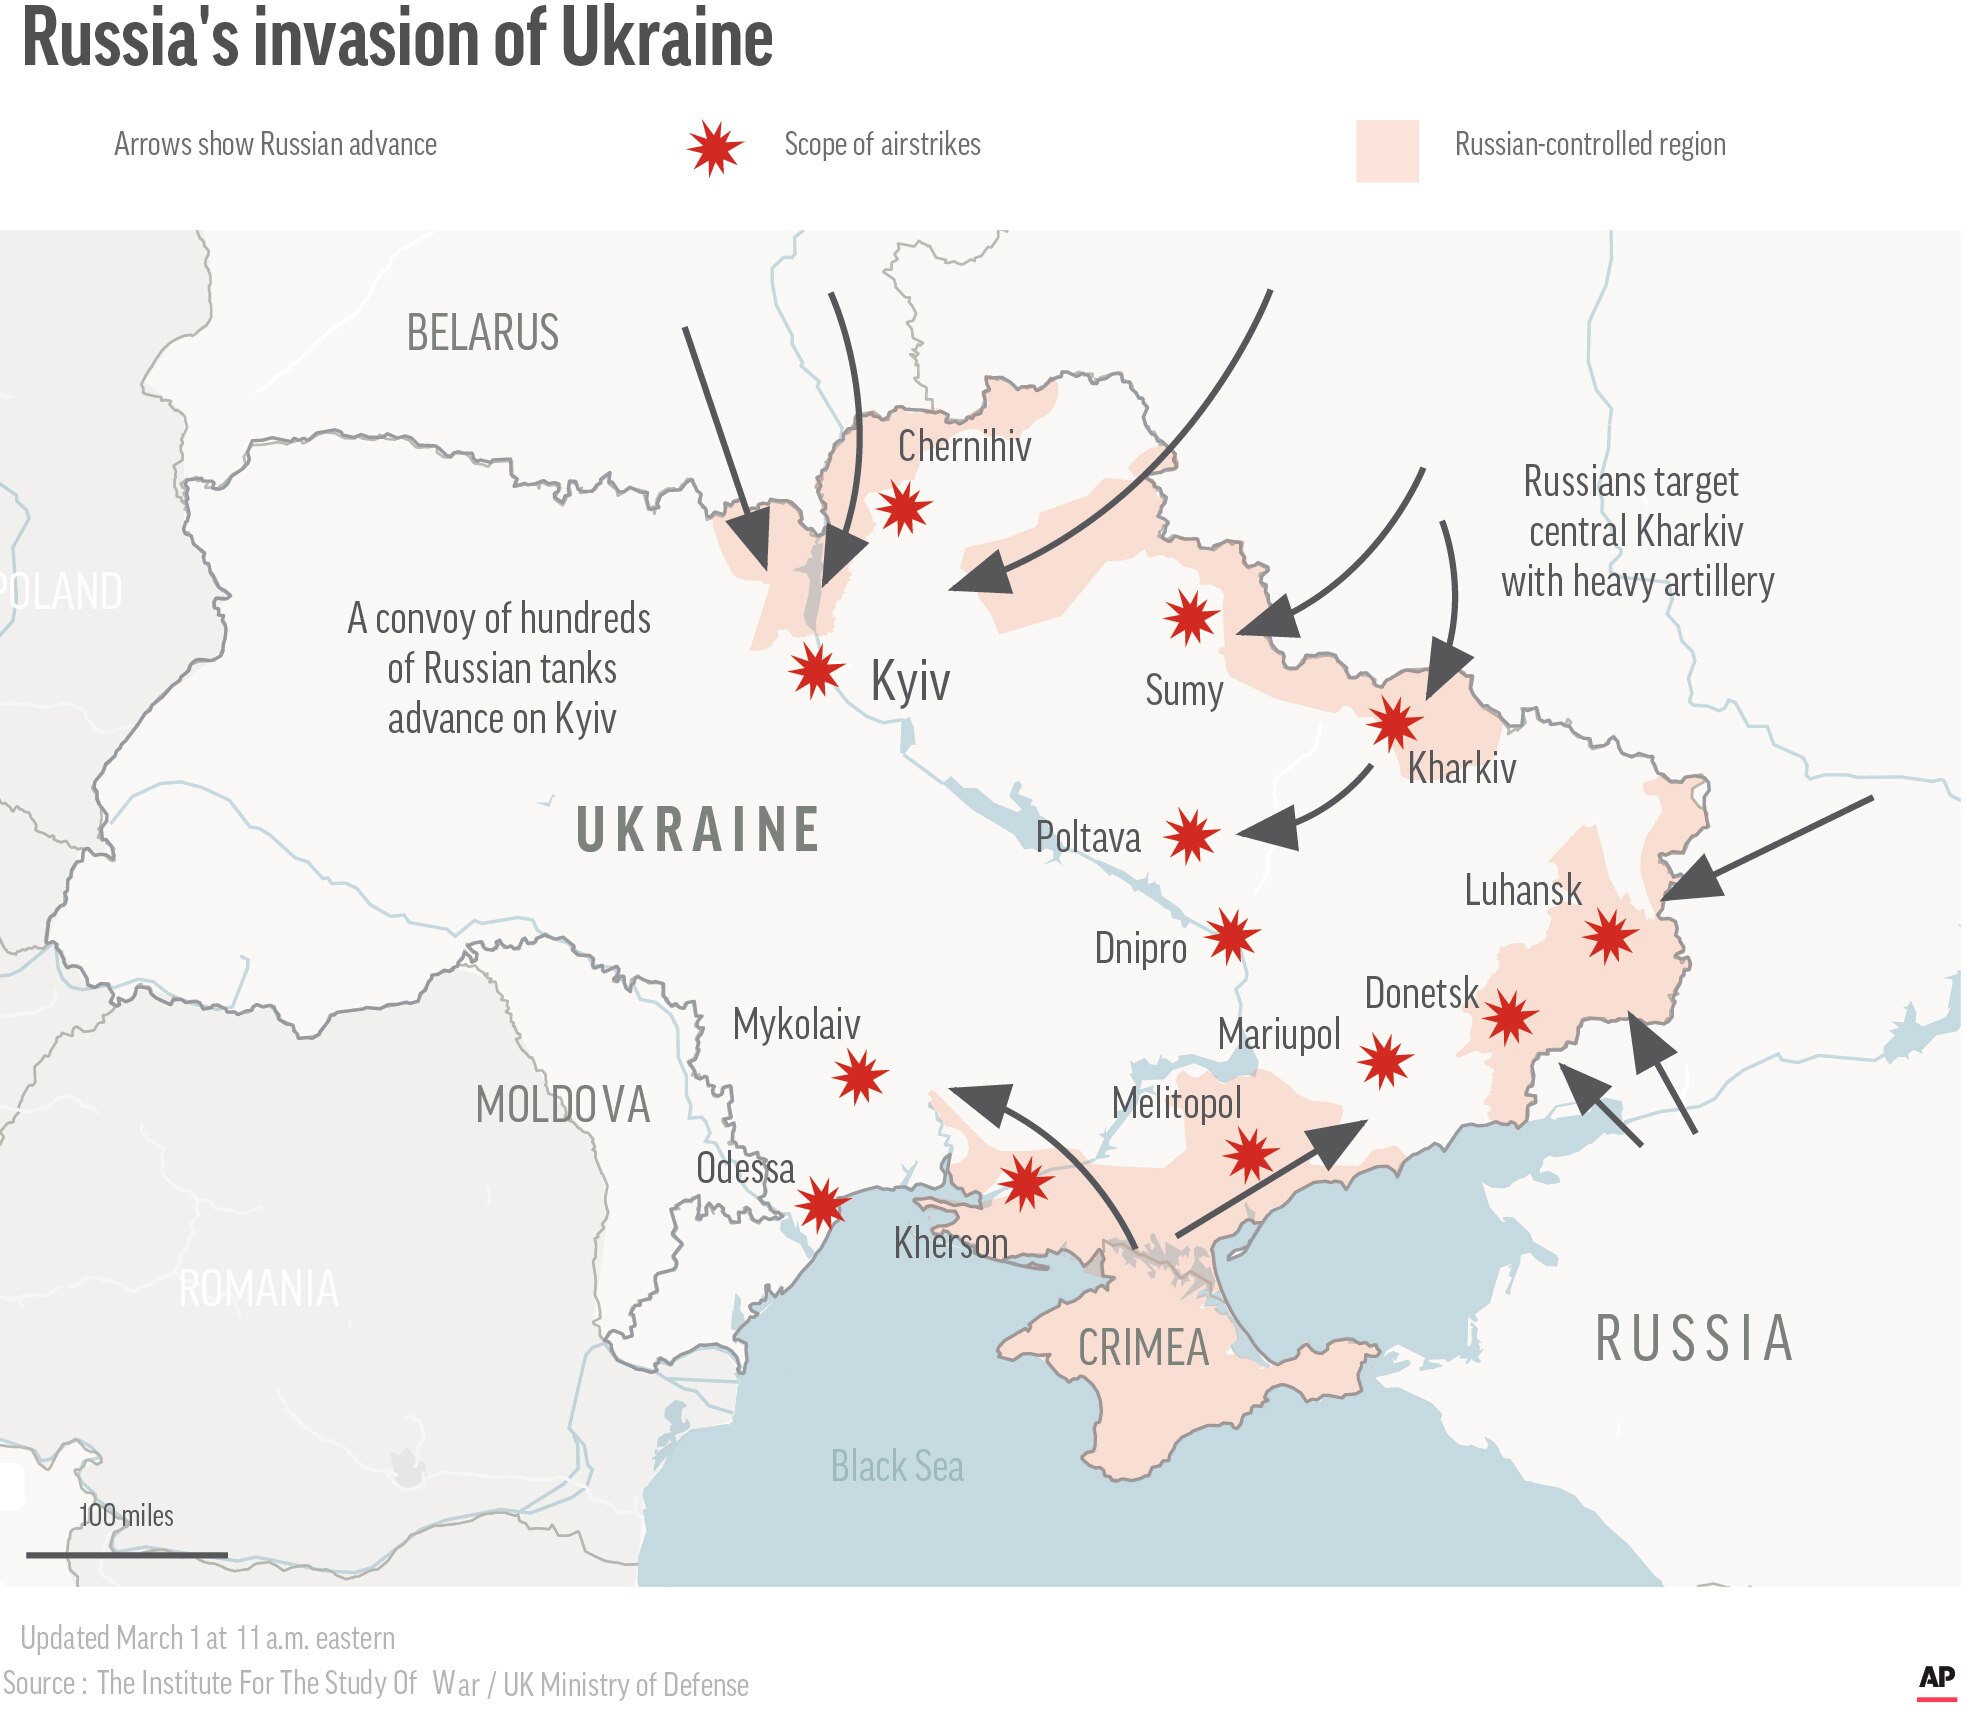 A map of Ukraine shows arrows corresponding to the Russian advance, coming from the north, north-east, and south